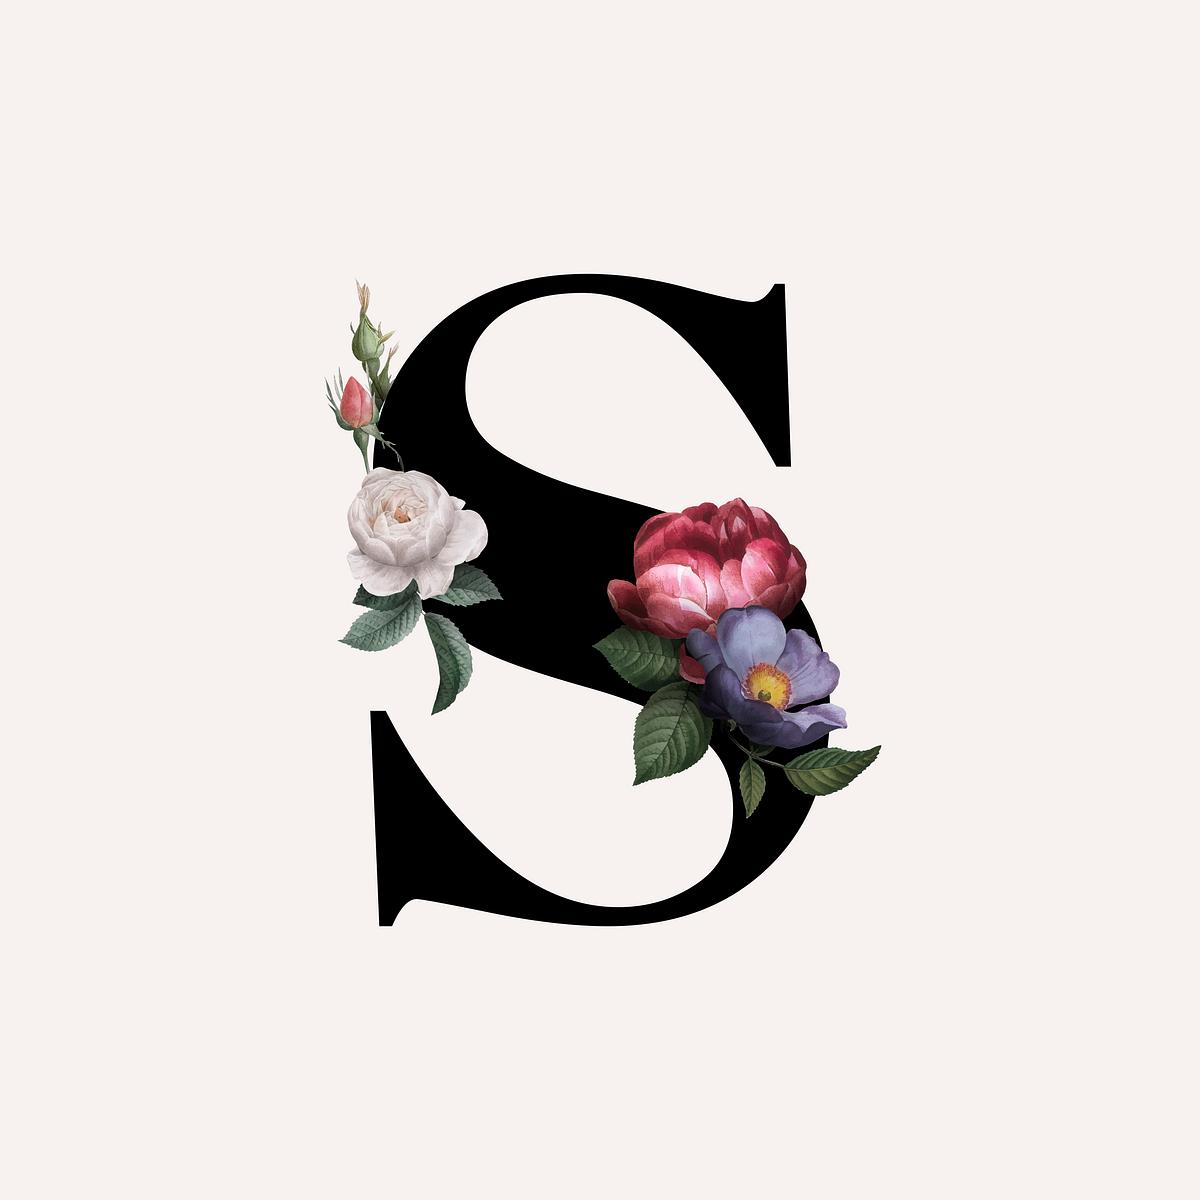 Floral letter S font | Free stock vector - 583158